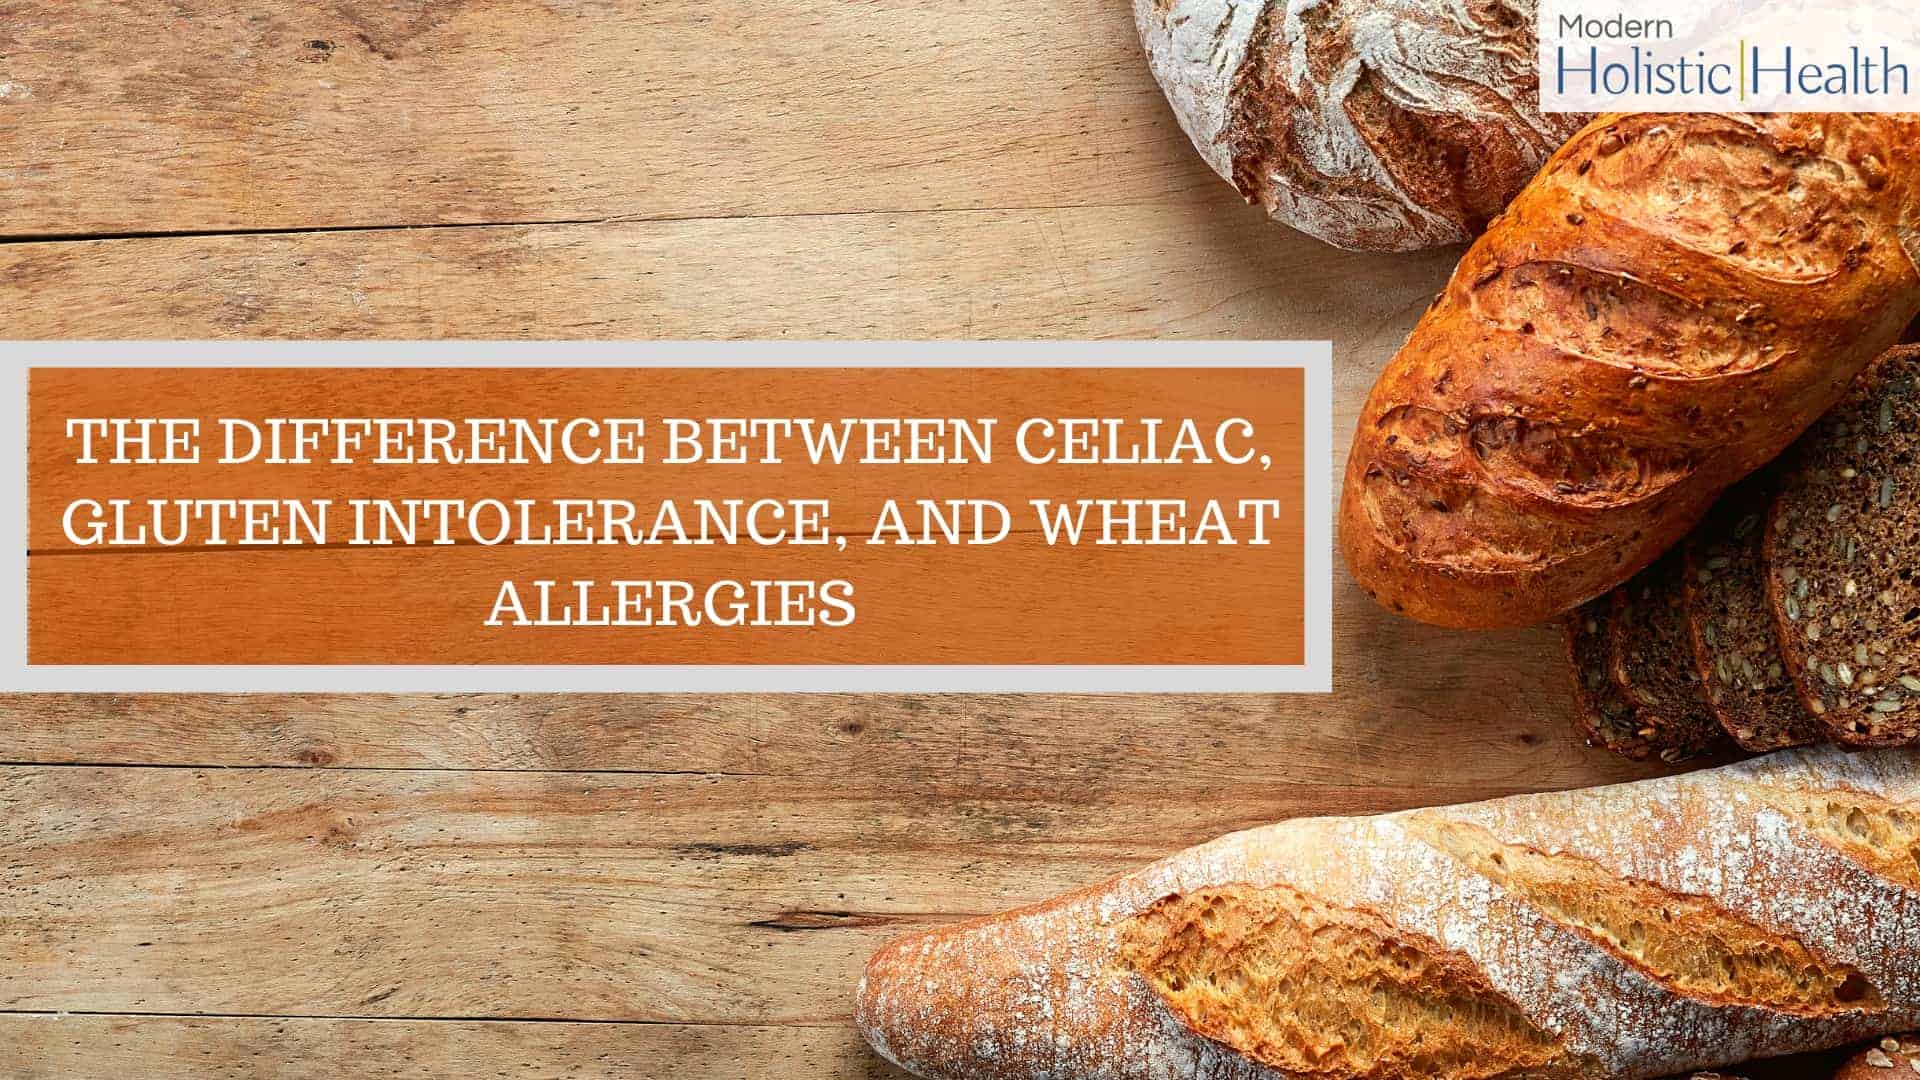 The Difference Between Celiac, Gluten Intolerance, and Wheat Allergies